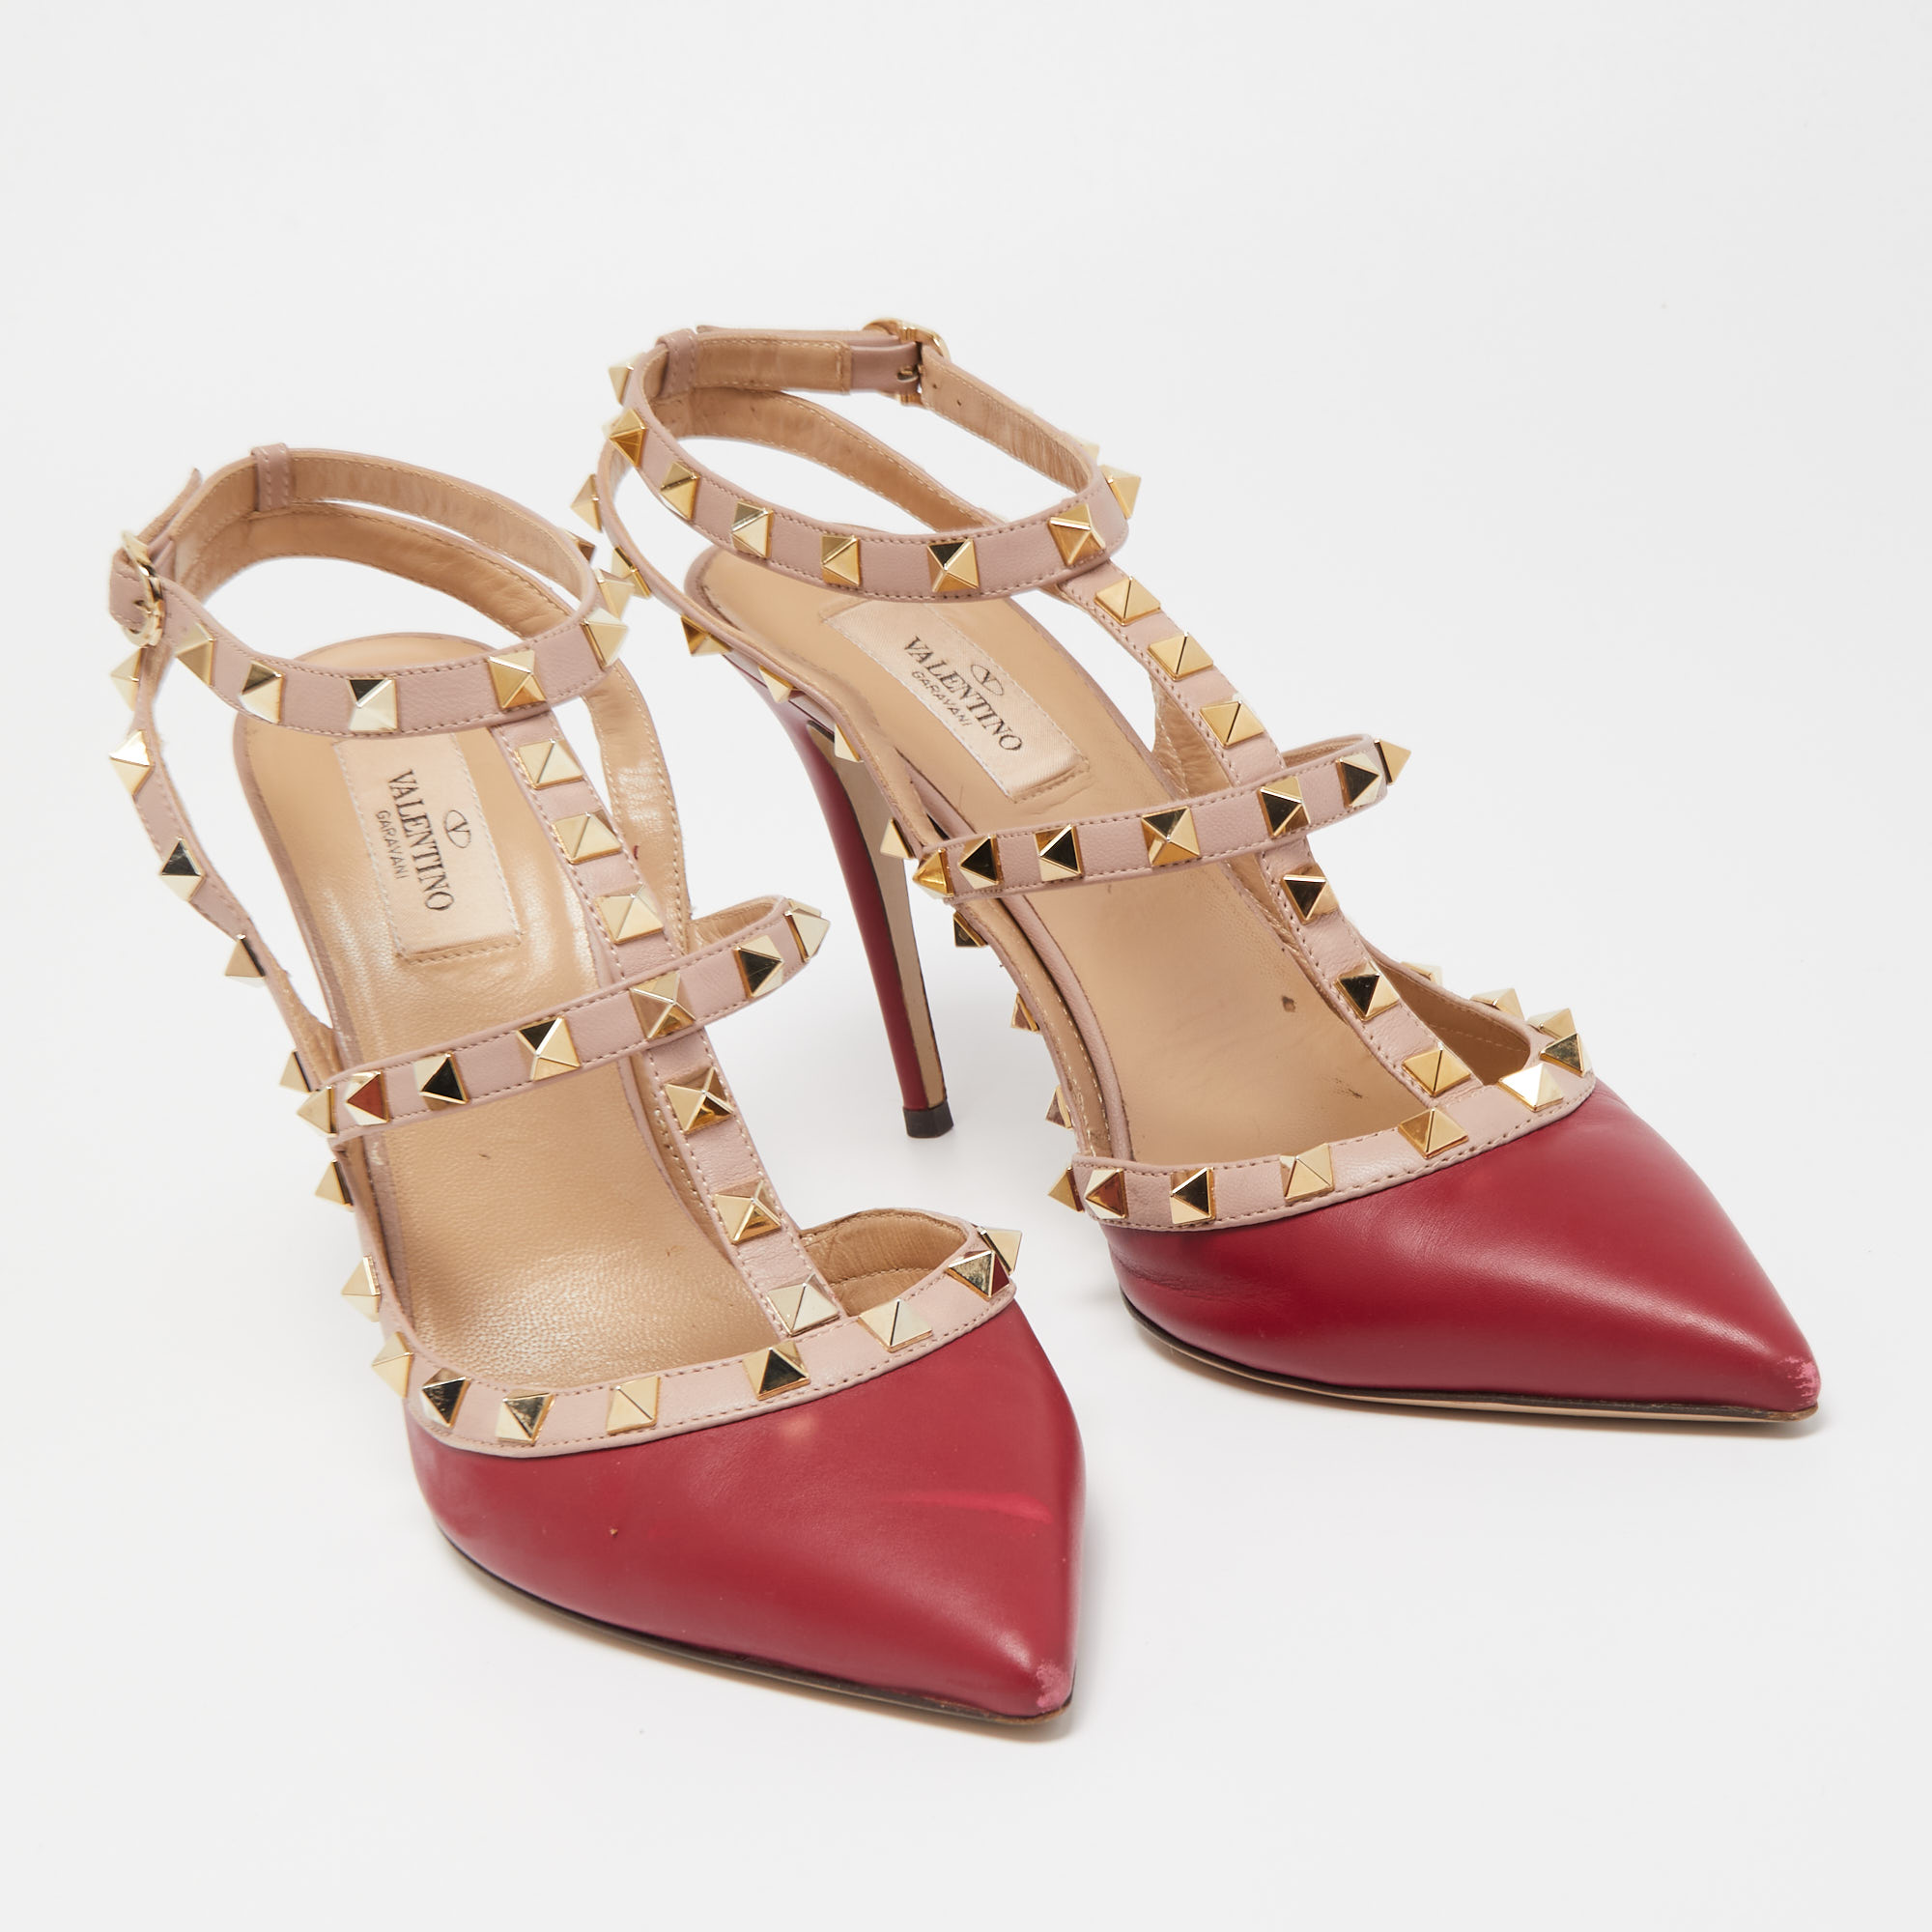 Valentino Red/Beige Leather Rockstud Strappy Pointed Toe Pumps Size 40